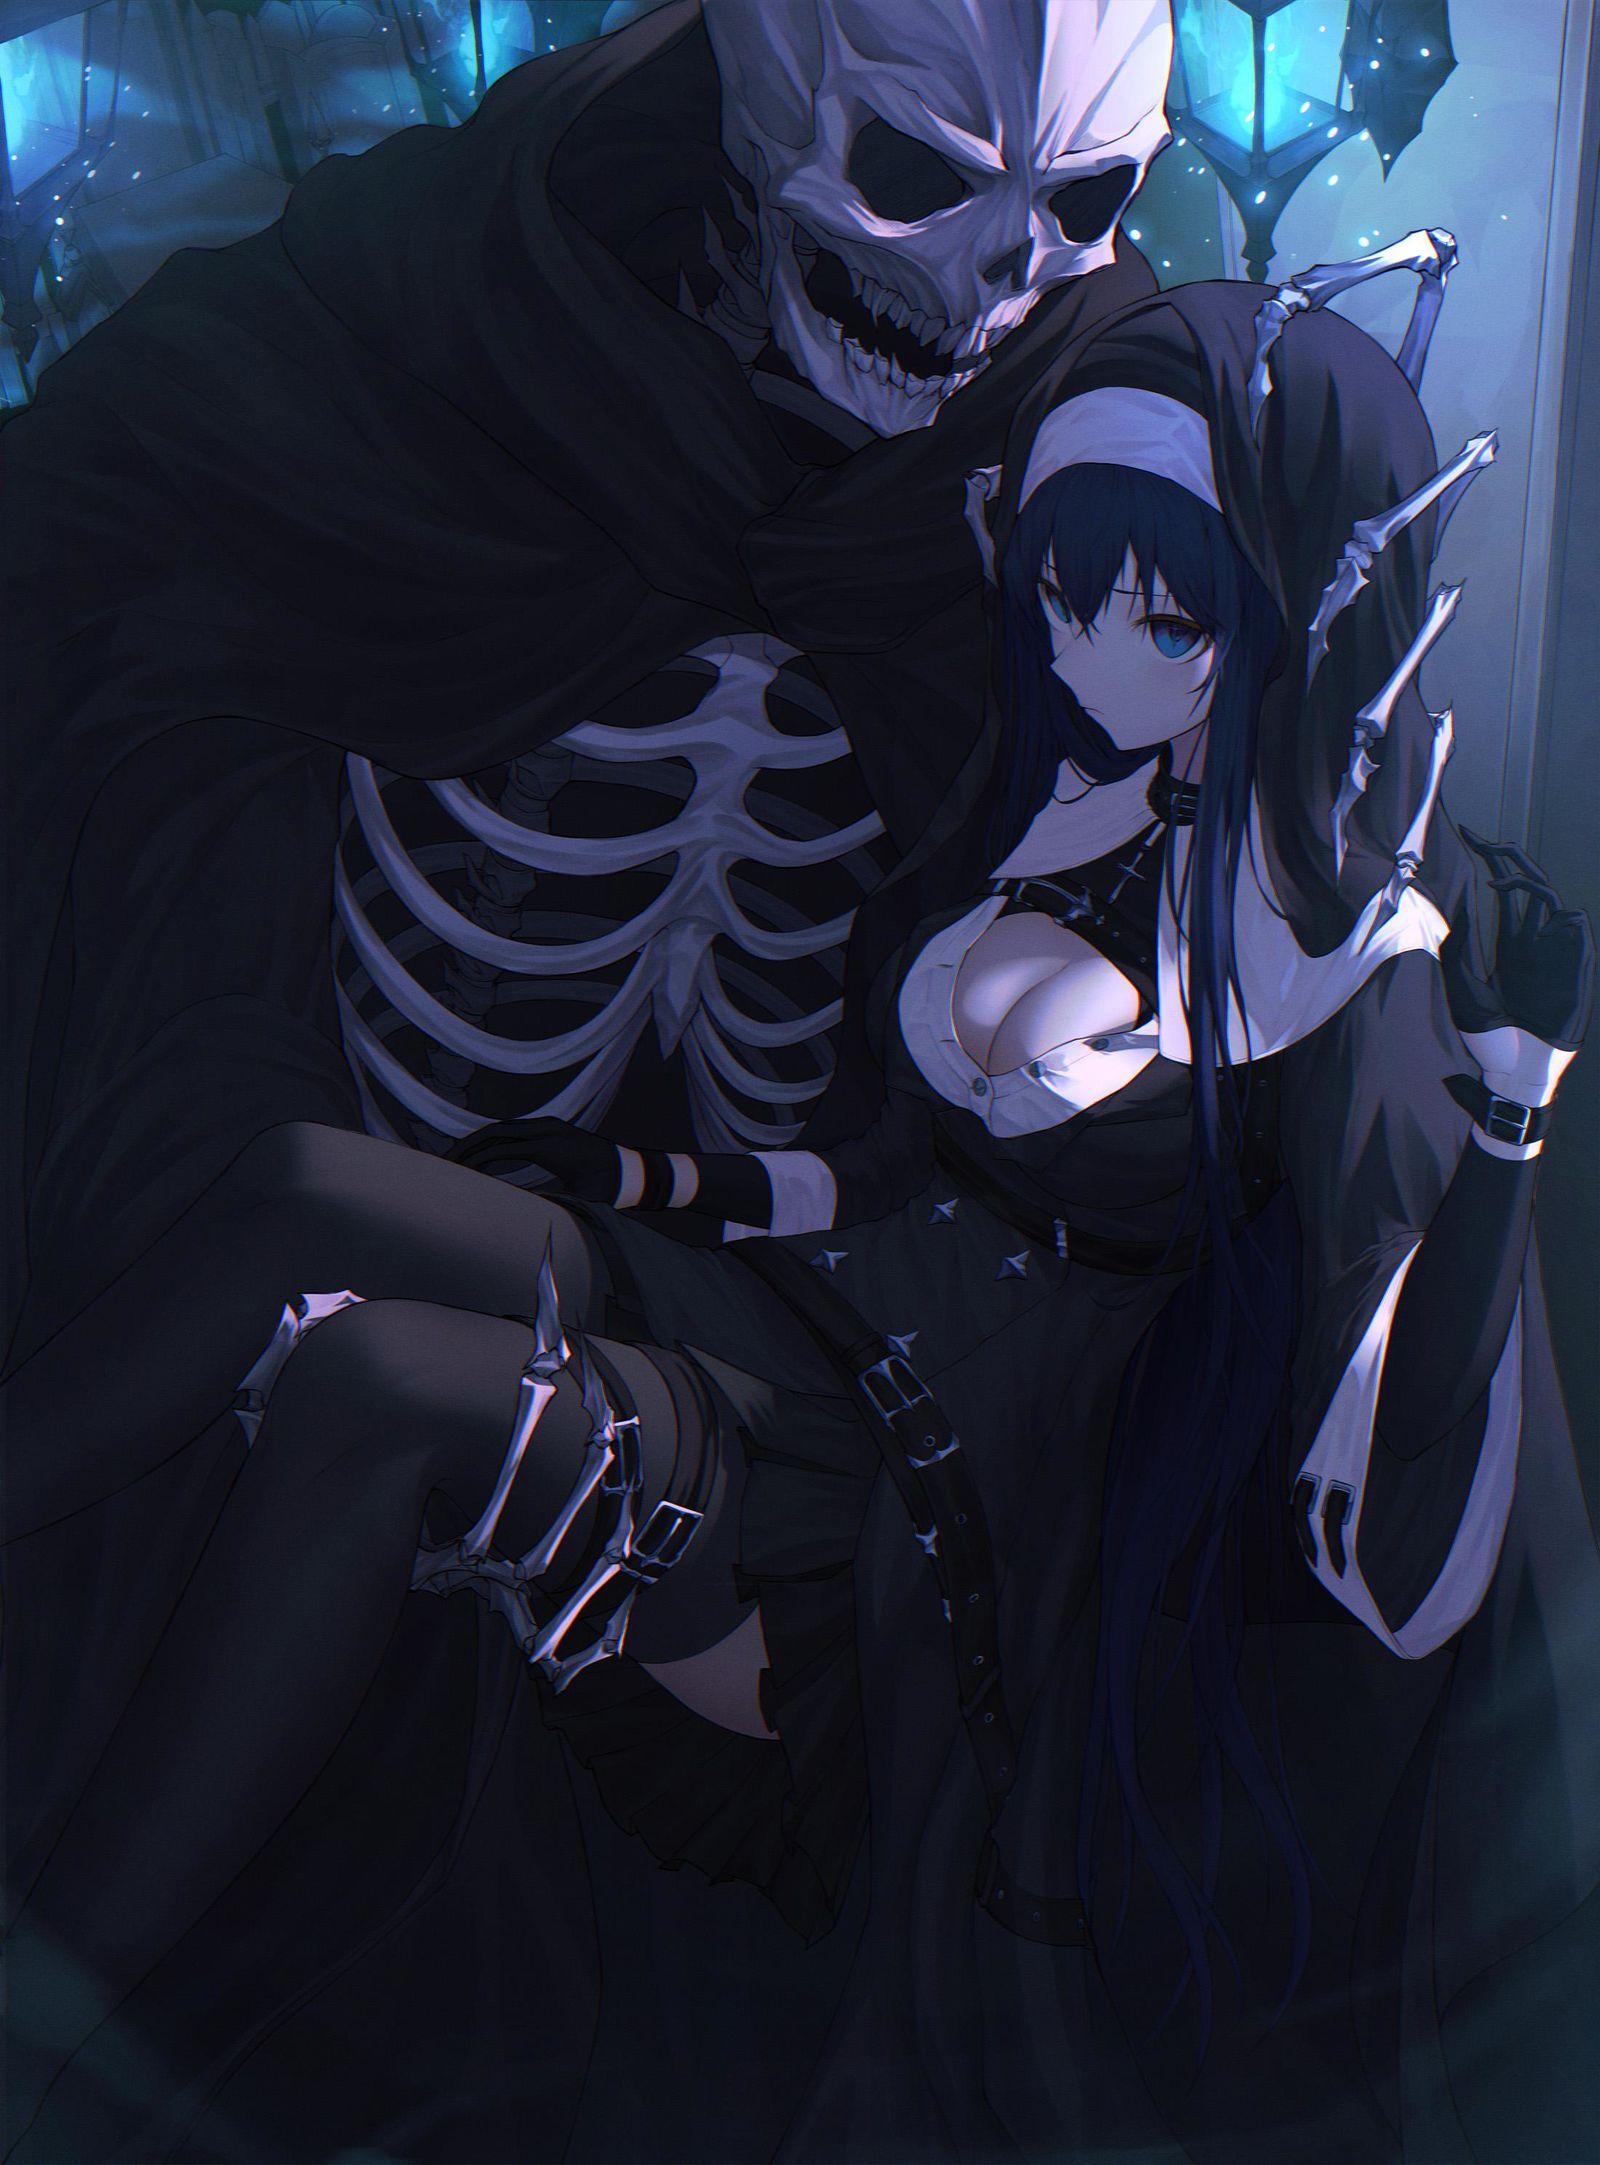 Sister and Death